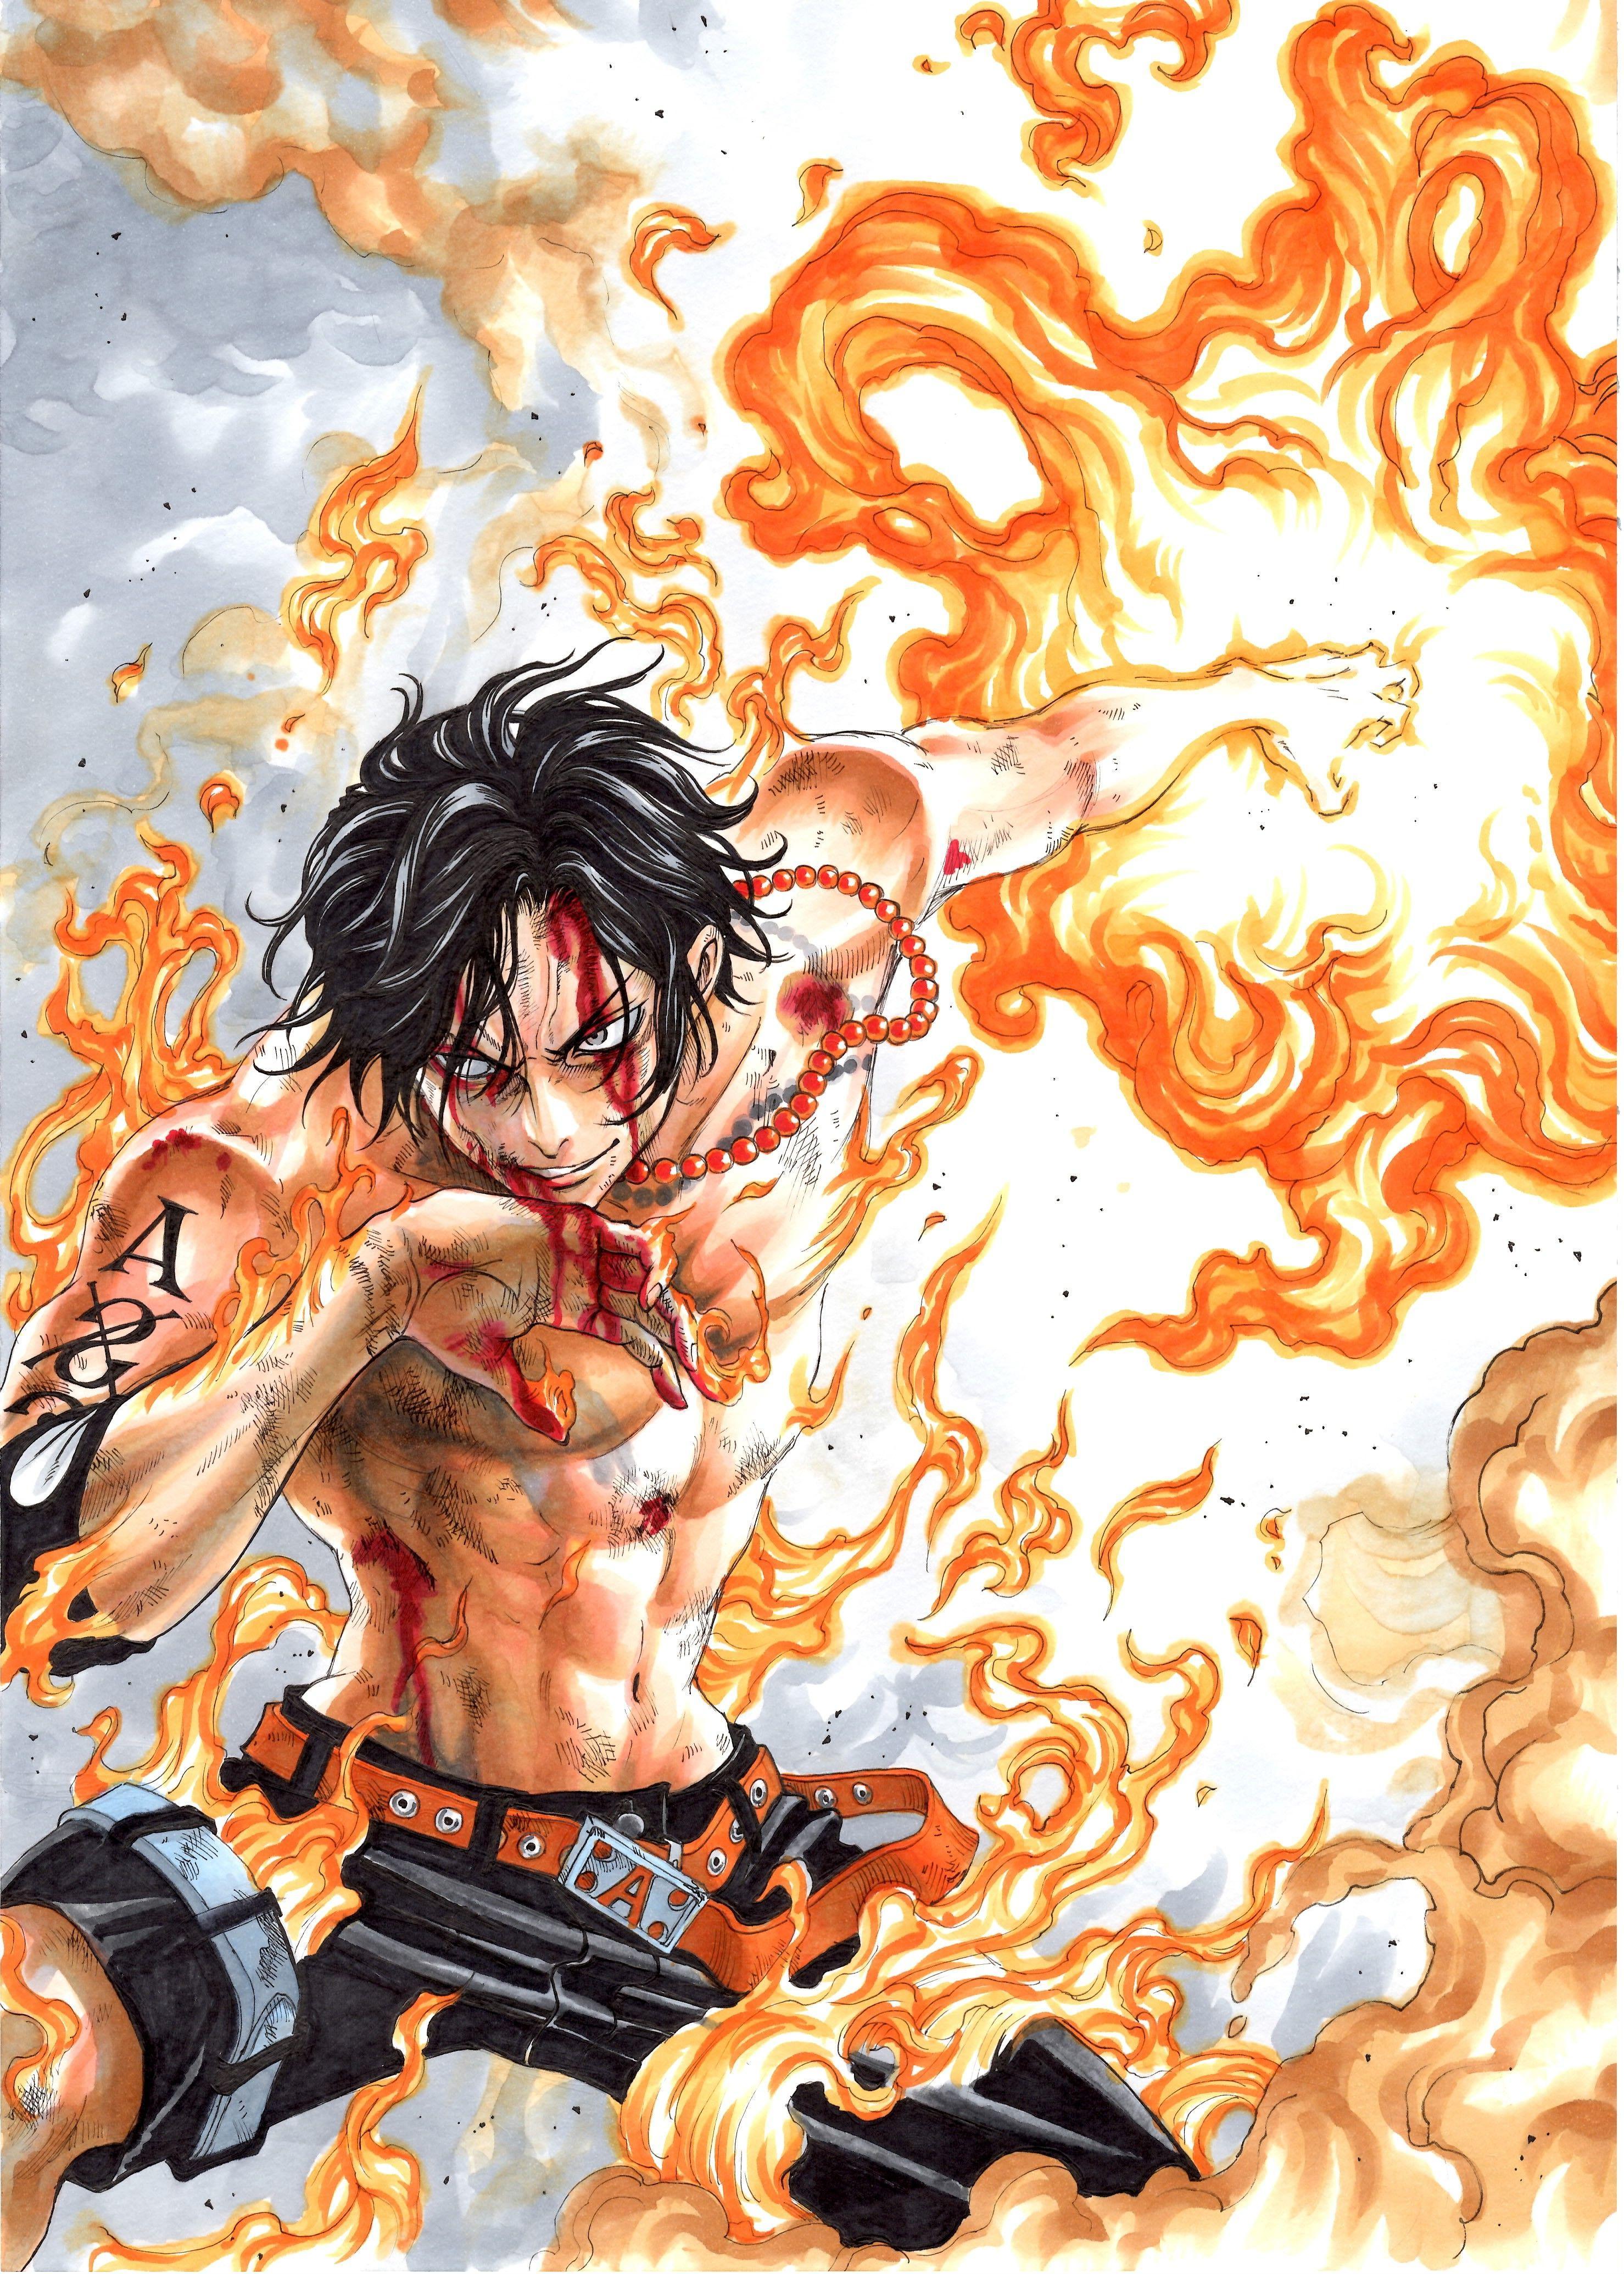 Portgas D. Ace Hd Wallpapers For Mobile, Portgas D. Ace, Anime